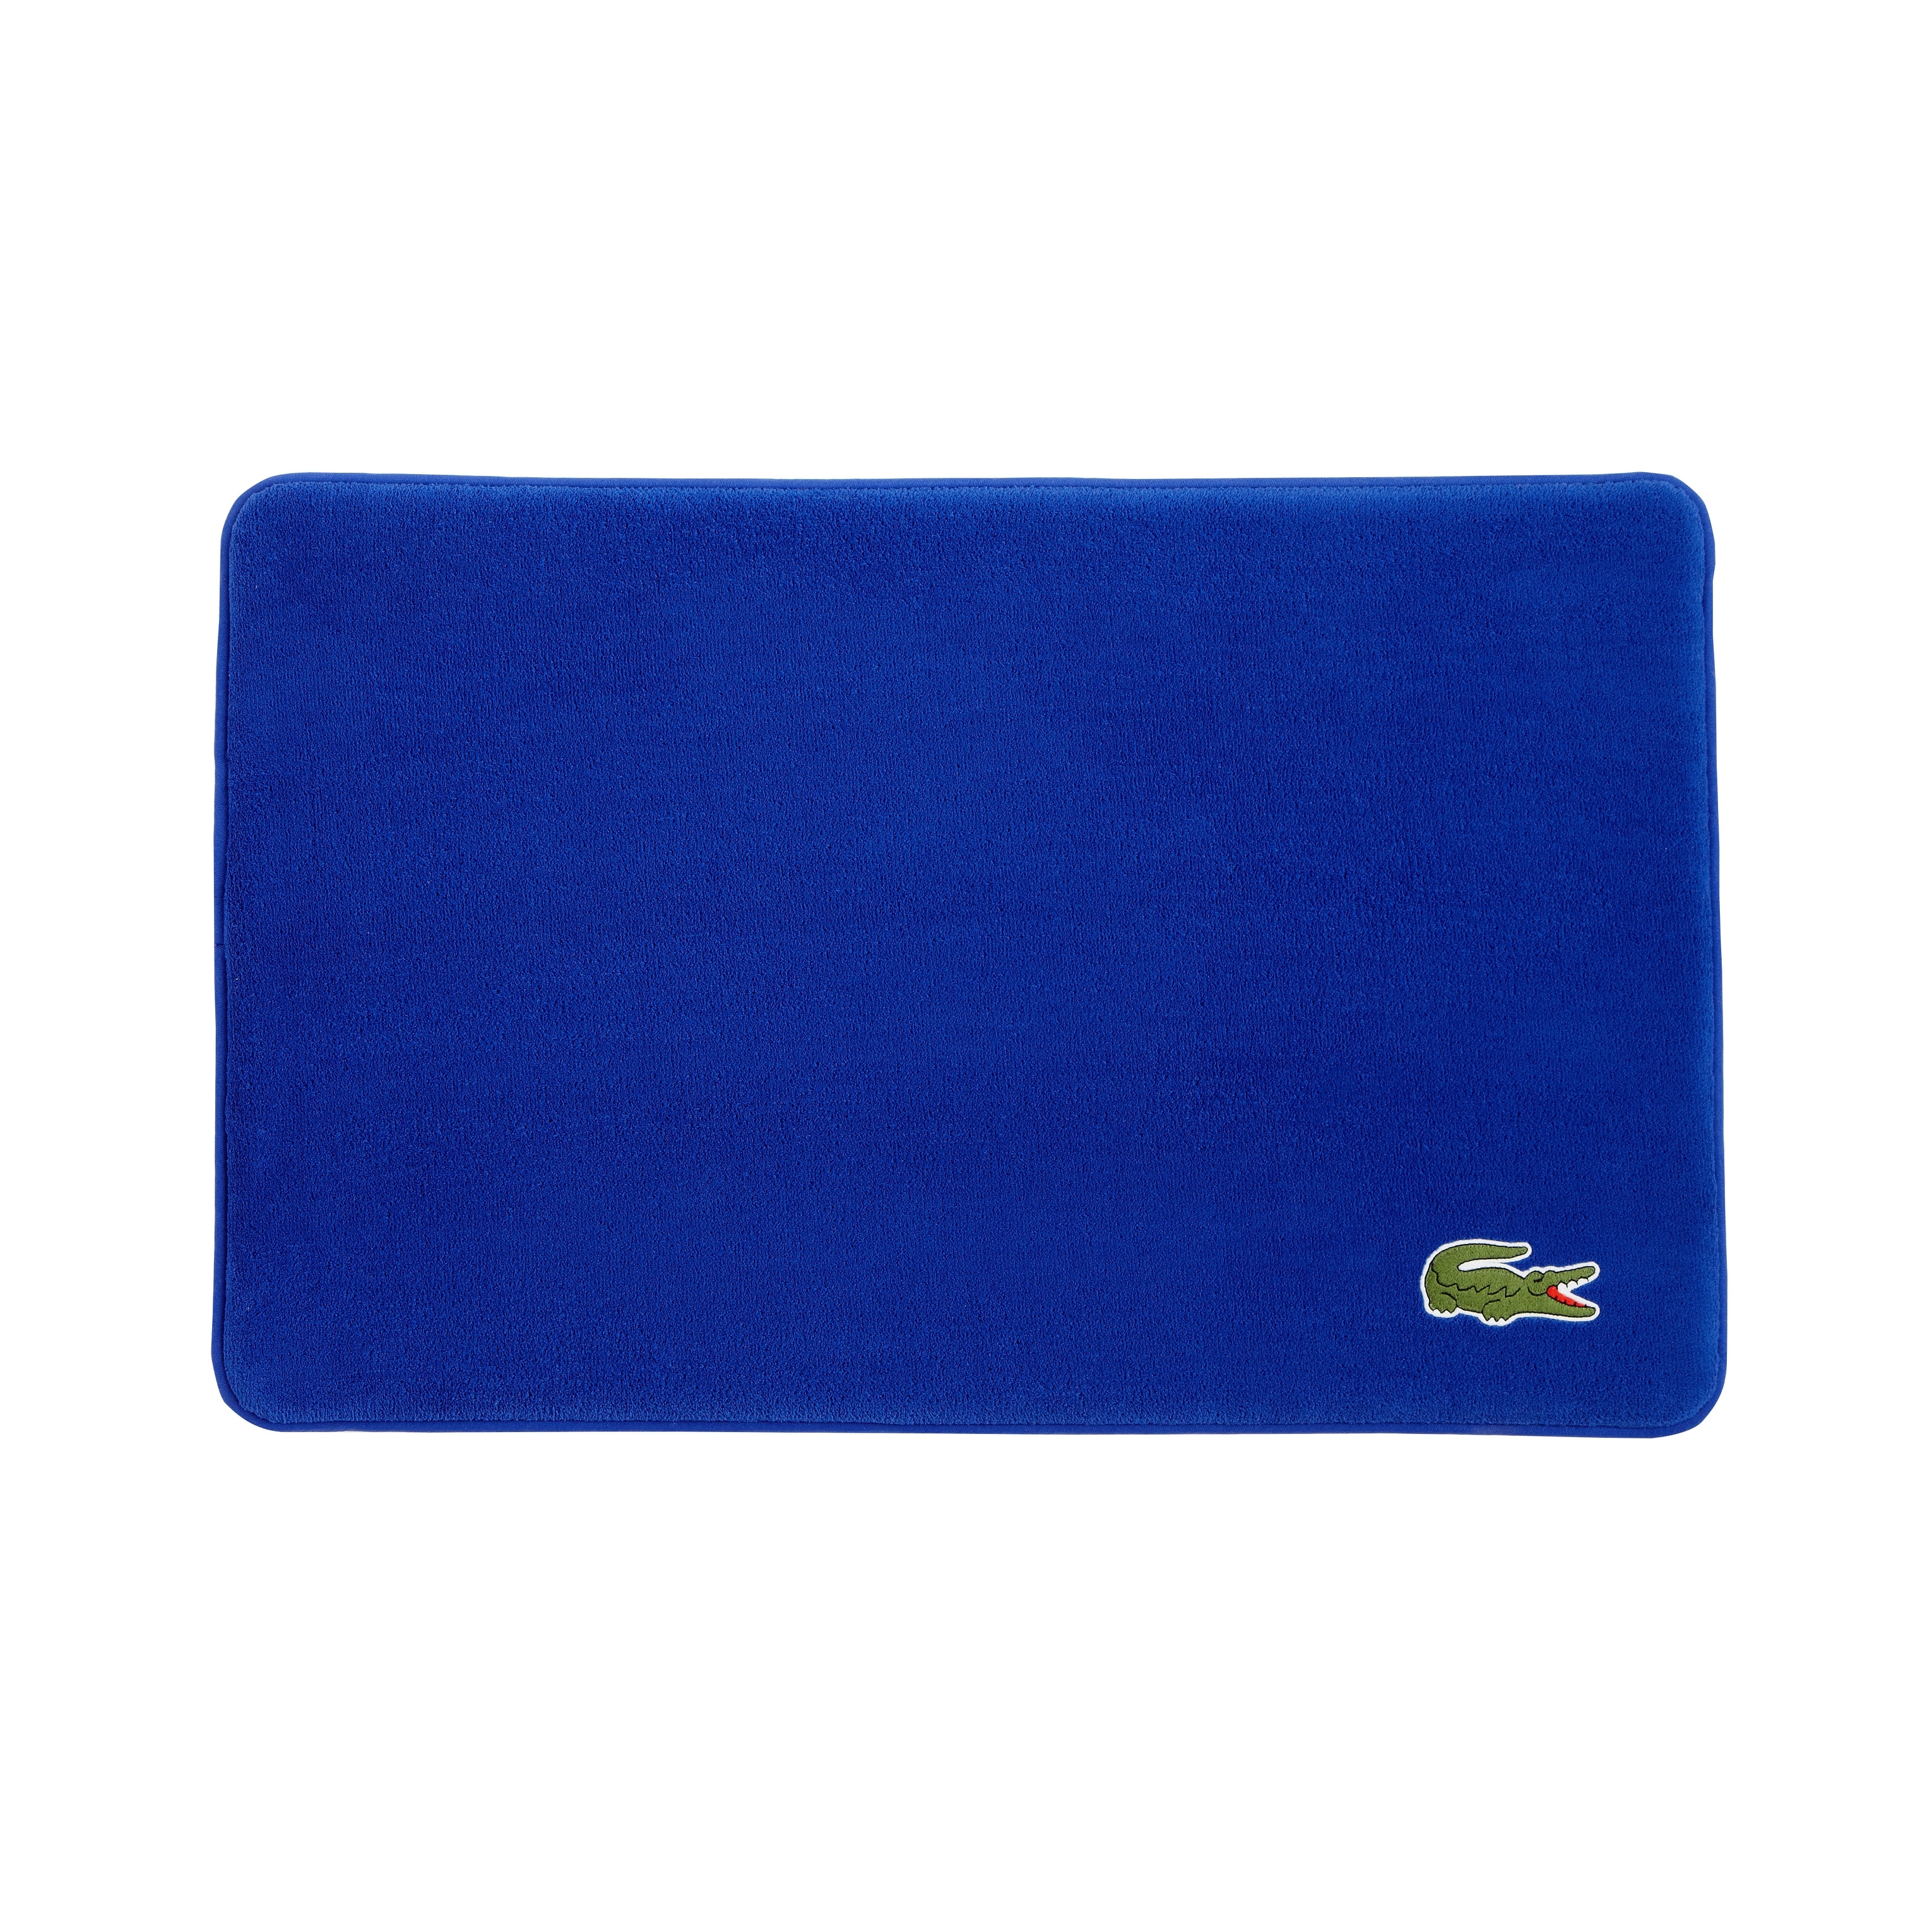 Lacoste Bathroom Rugs and Bath Mats - Bed Bath & Beyond